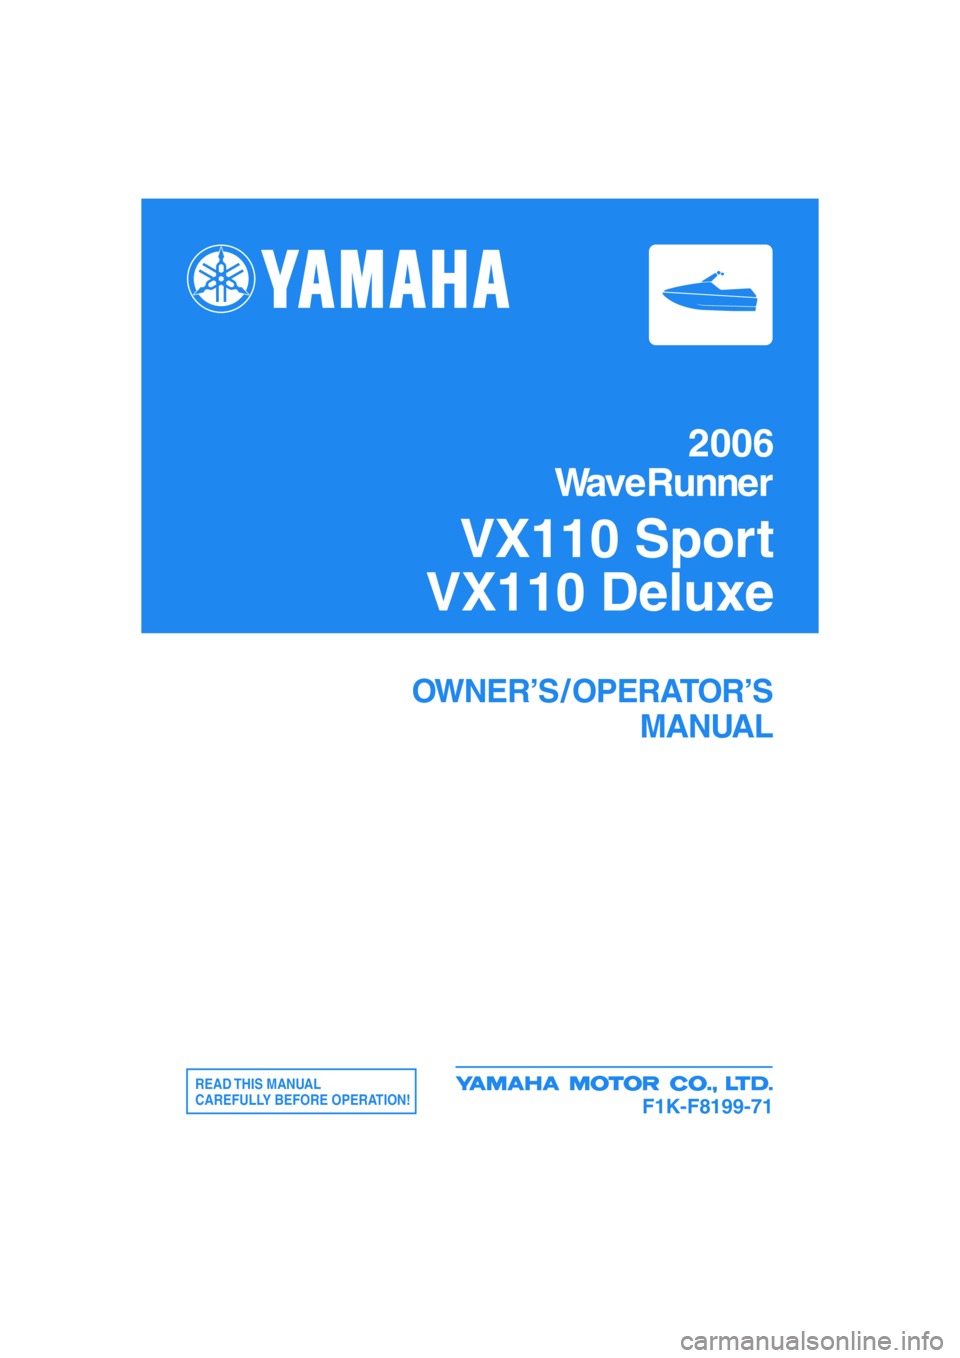 YAMAHA VX SPORT 2006  Owners Manual 2006
WaveRunner
VX110 Sport
VX110 Deluxe
OWNER’S / OPERATOR’S
MANUAL
READ THIS  MANUAL
CAREFULLY BEFORE OPERATION!
F1K-F8199-71 